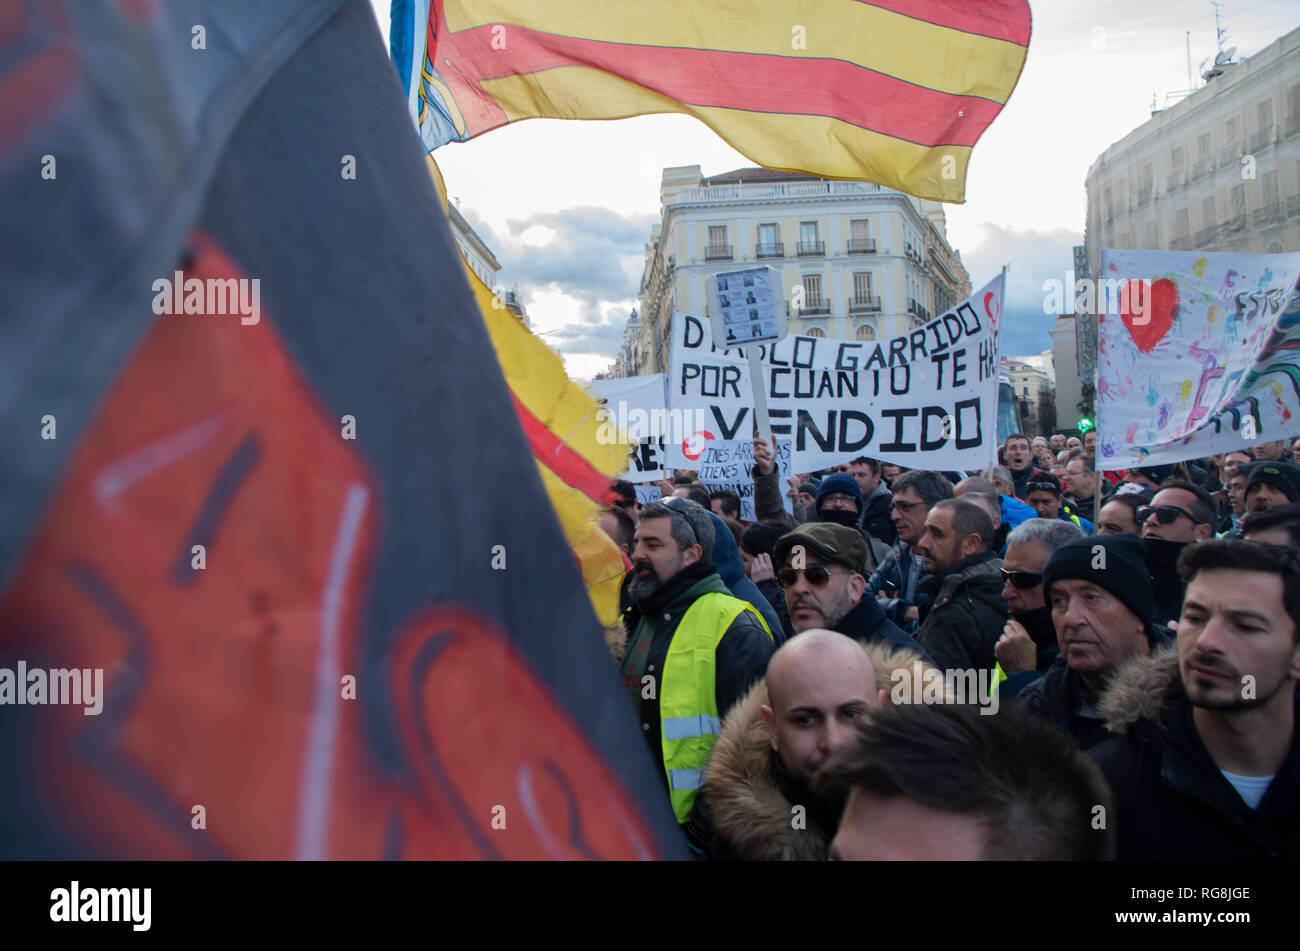 Madrid, Spain. 28th January 2019. Taxi drivers in Madrid have been on a strike for more than a week demanding the prohibition of Uber and Cabify in the Spanish capital-city.   Due to a lack of agreement, hundreds of taxi drivers protested at Puerta del Sol, Madrid’s central square.  In the picture taxi drivers protesting with the flag of the taxi unions. Credit: Lora Grigorova/Alamy Live News Stock Photo